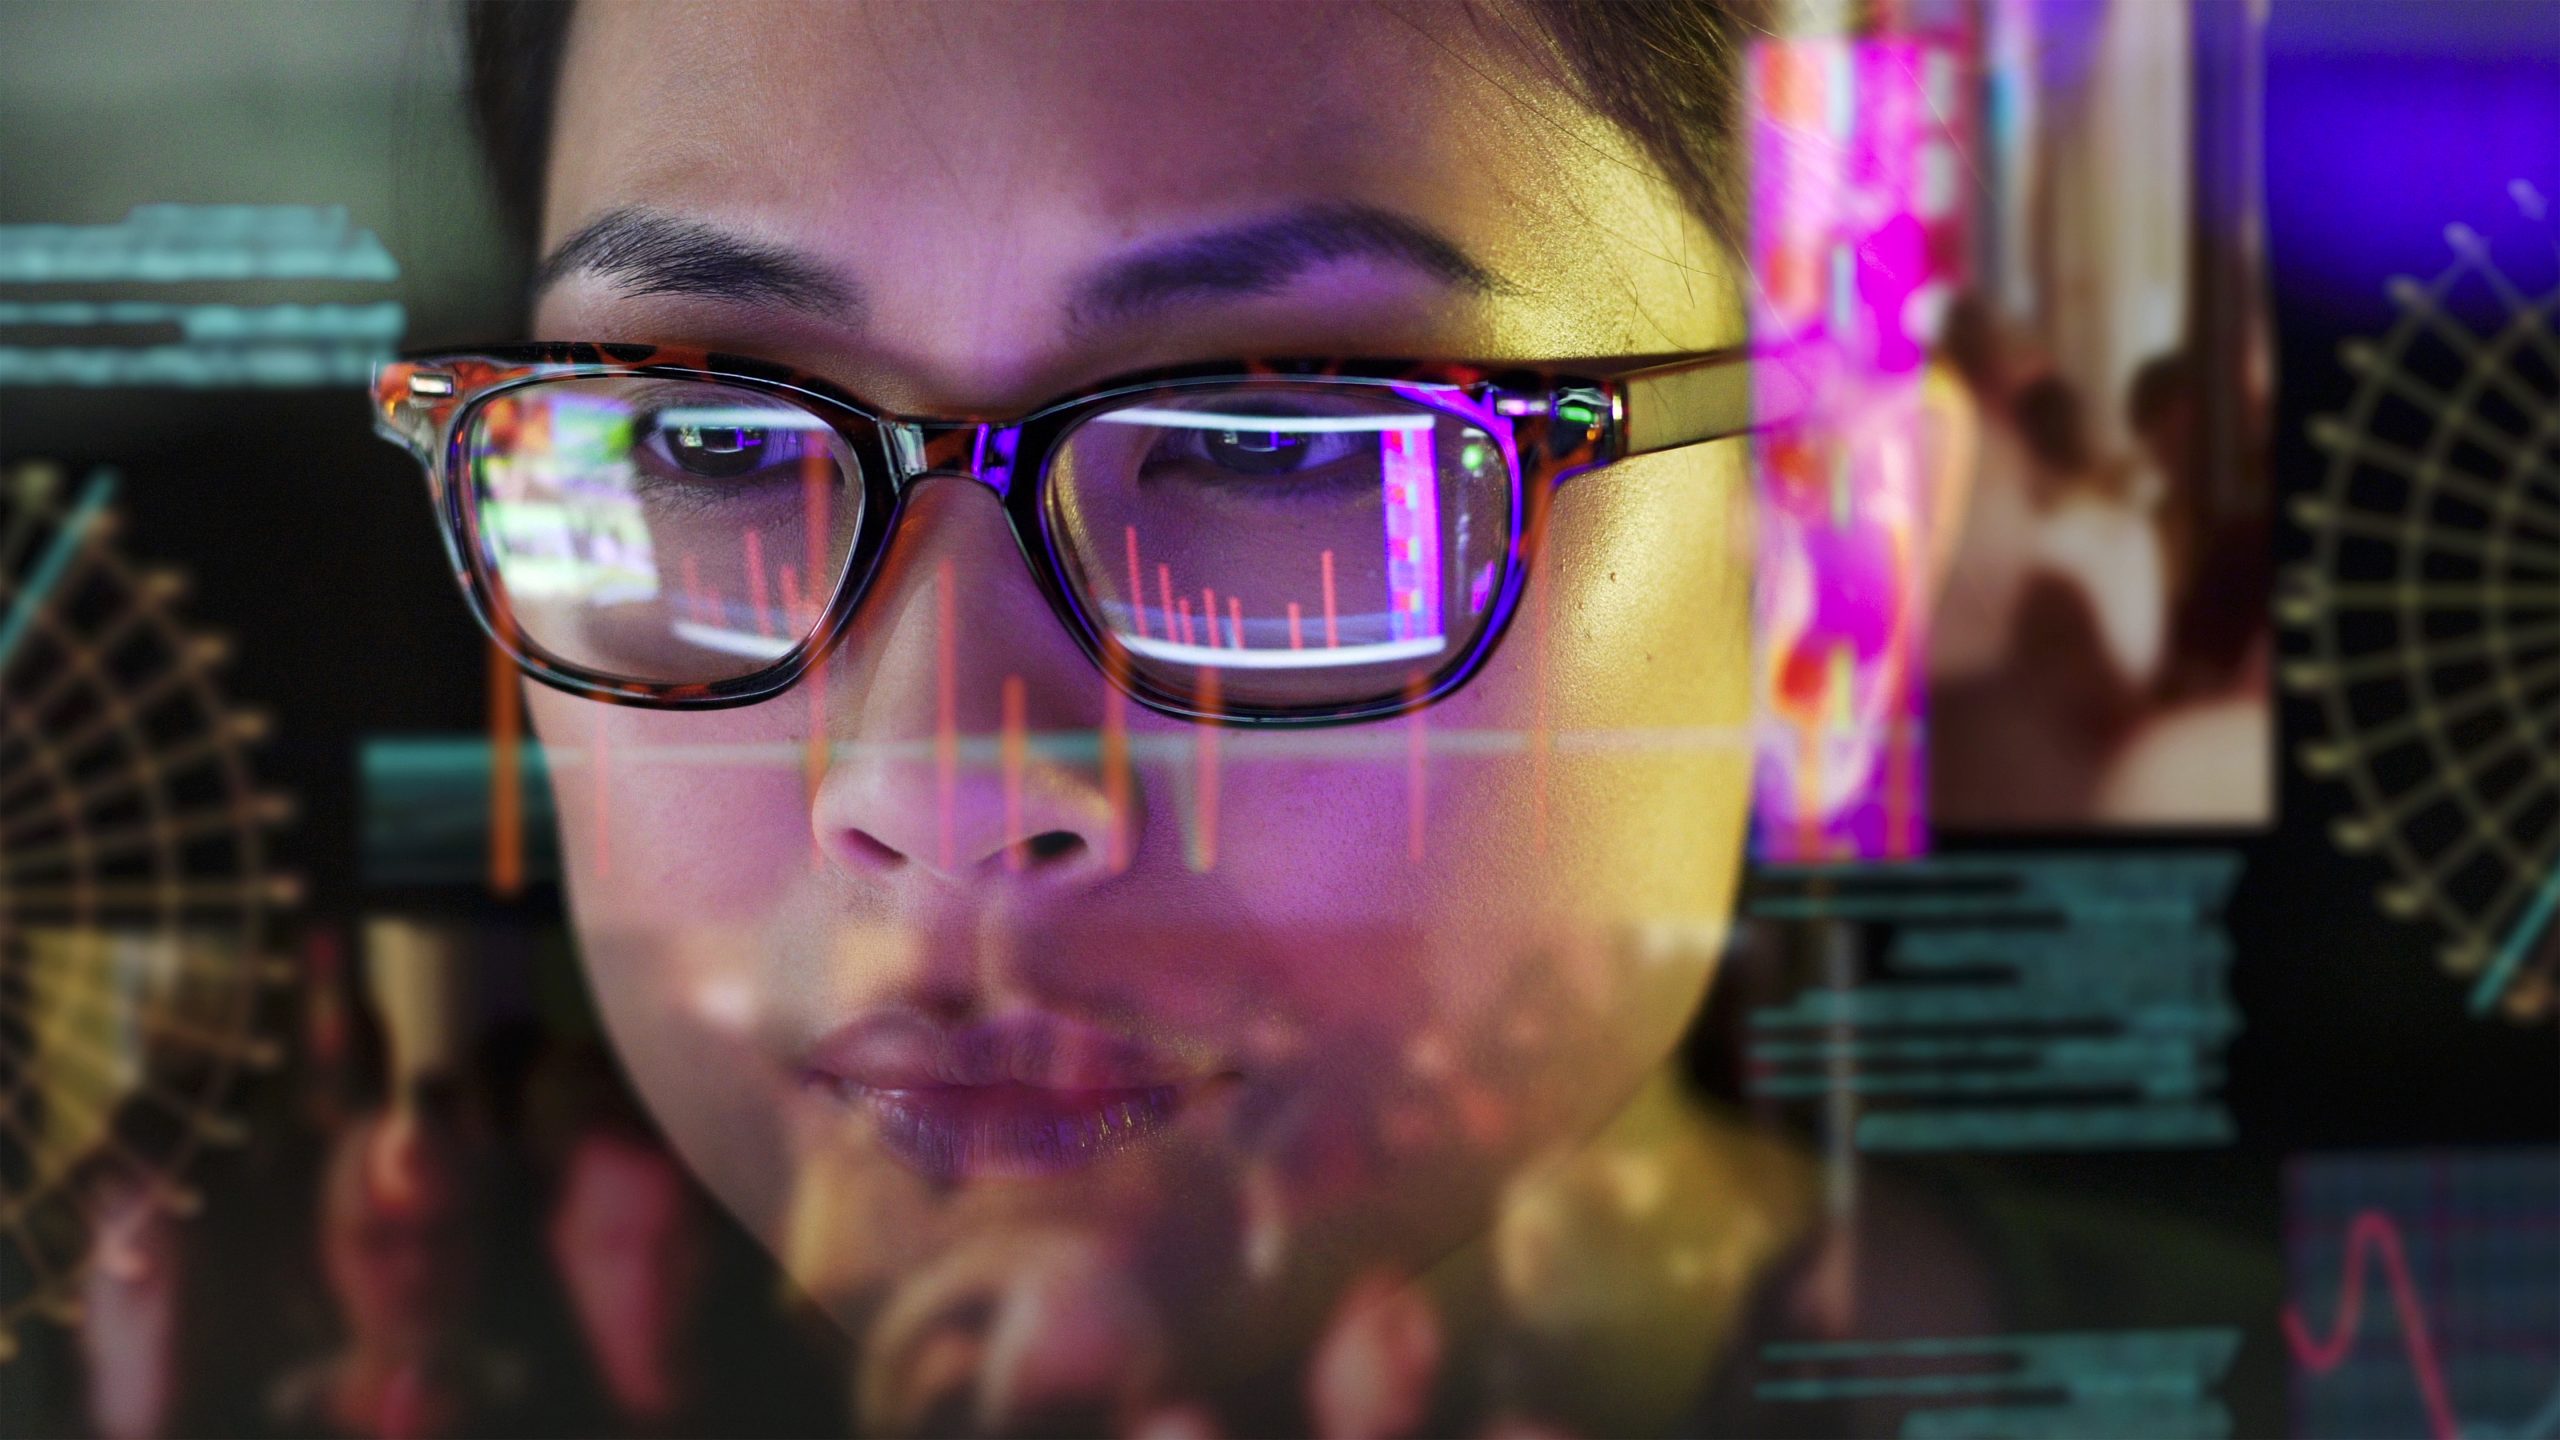 Close up stock photo of an Asian woman carefully studying moving data on her computer screen, the screen is unusual as it is transparent and the camera is looking through the back of the screen.